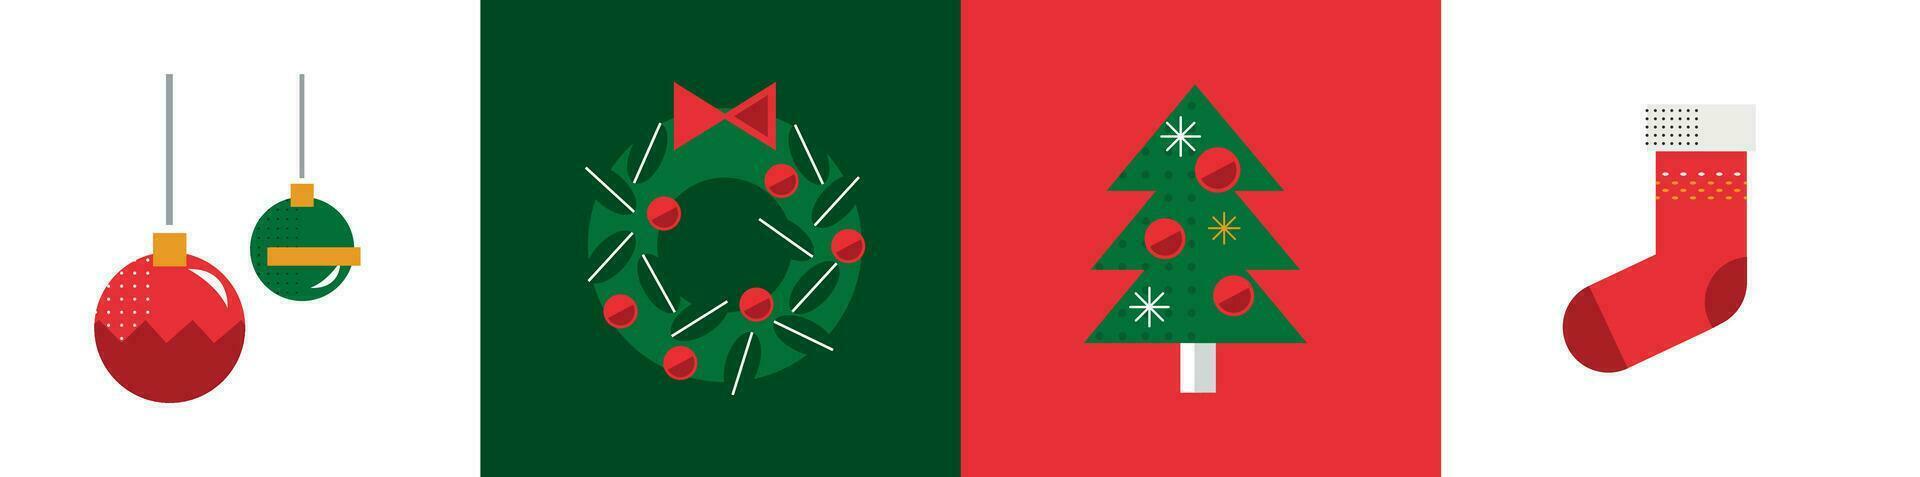 Christmas elements in modern minimalist geometric modern style. Colorful flat vector cartoon style illustration. Christmas tree with geometric patterns, stars and abstract elements